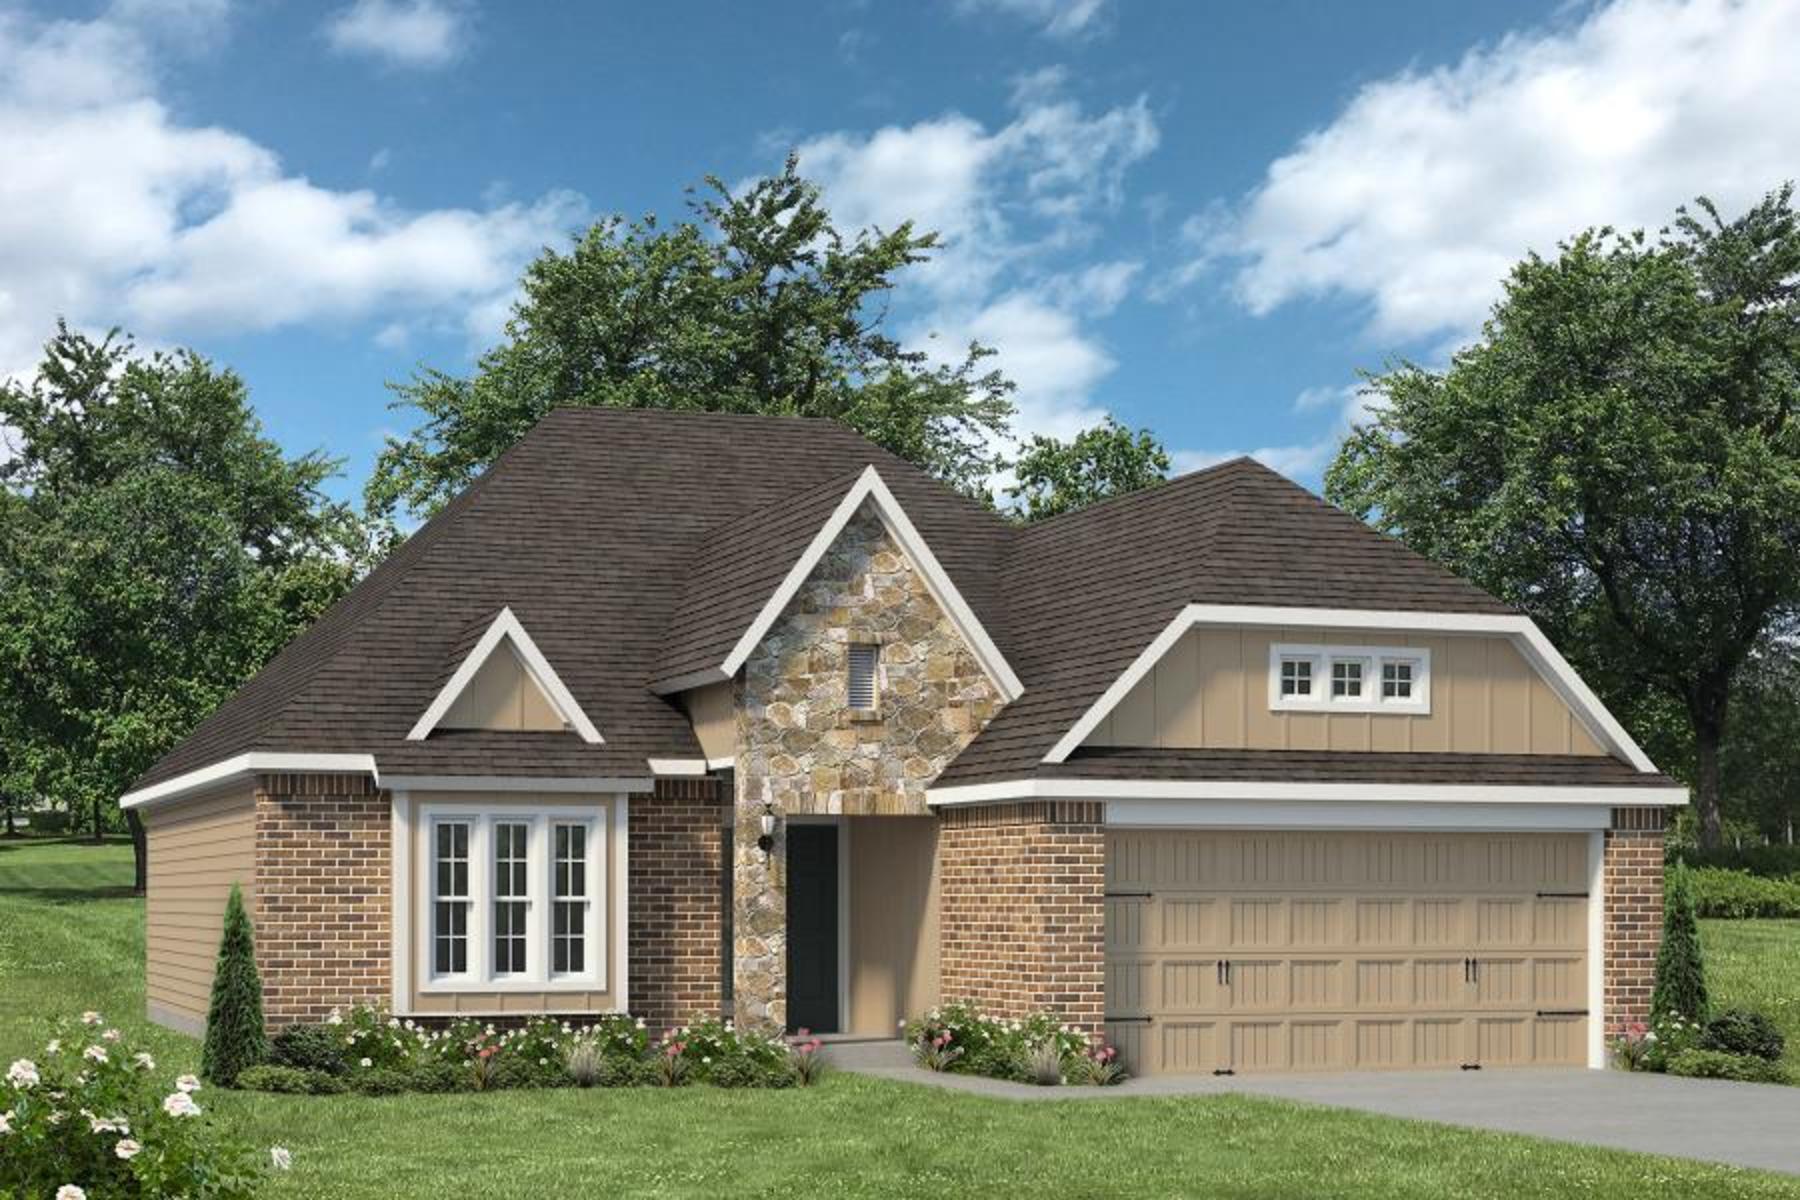 https://myhome.anewgo.com/client/stylecraft/community/Our%20Plans/plan/1613?elevId=53. Blakely New Home Floor Plan